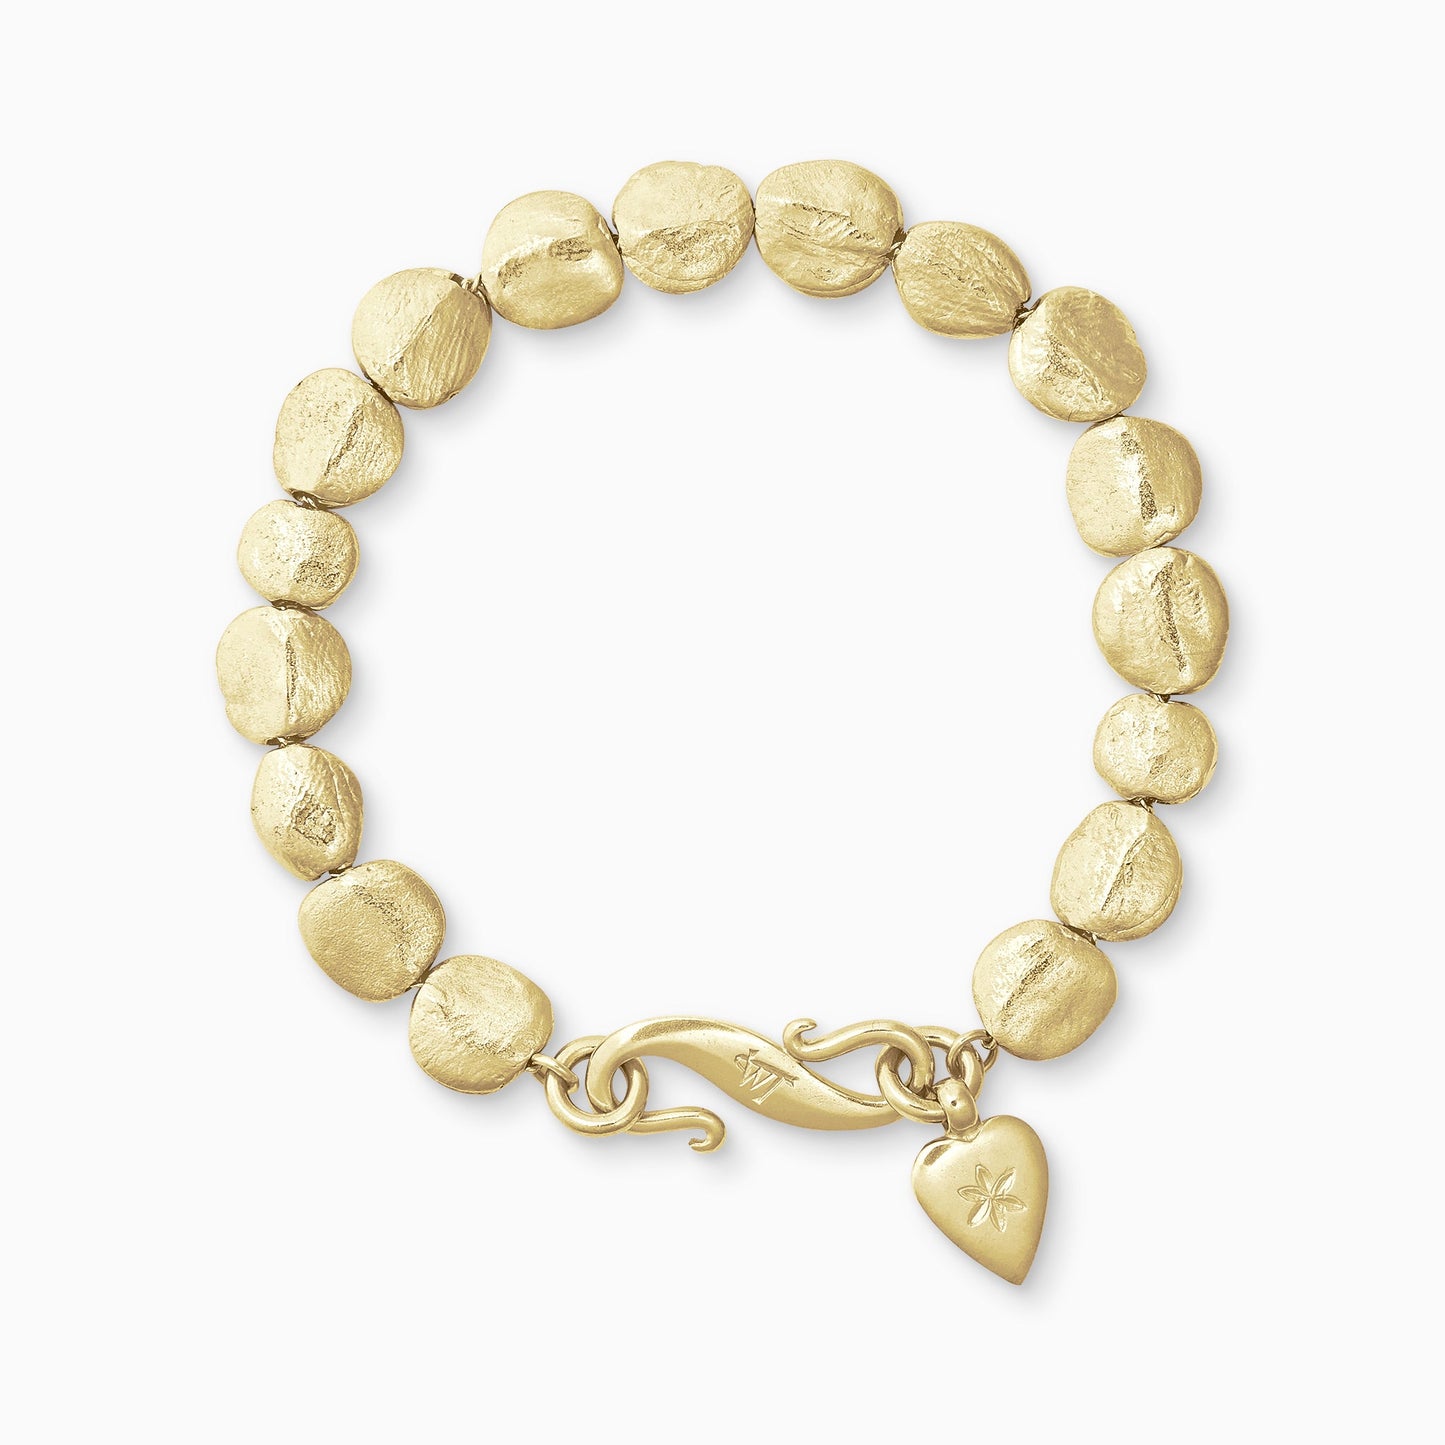 An 18ct Fairtrade yellow gold bracelet of handmade textured beads with a smooth heart shaped charm engraved with a 6 petal flower and our signature ’S’ clasp.nBracelet length 190mm. Beads varying from approximately 7mm x 4mm to 10mm x 11mm